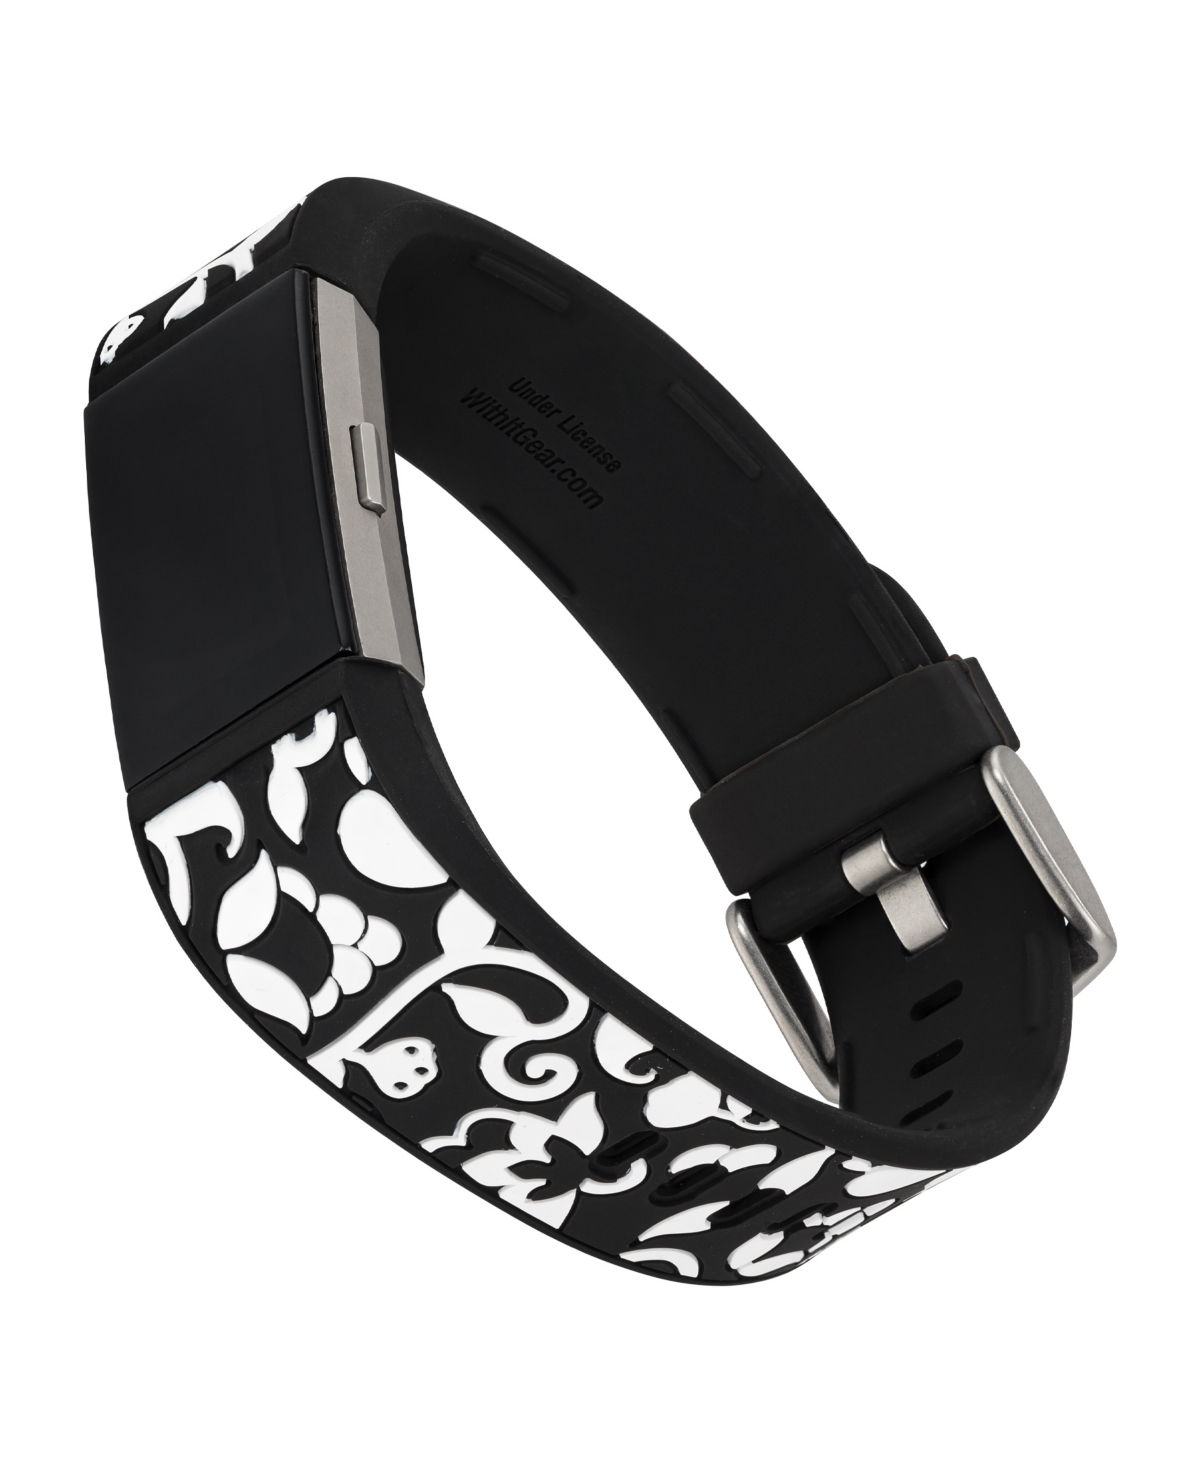 Black and White Premium Silicone Band Compatible with the Fitbit Charge 2 - Black, White